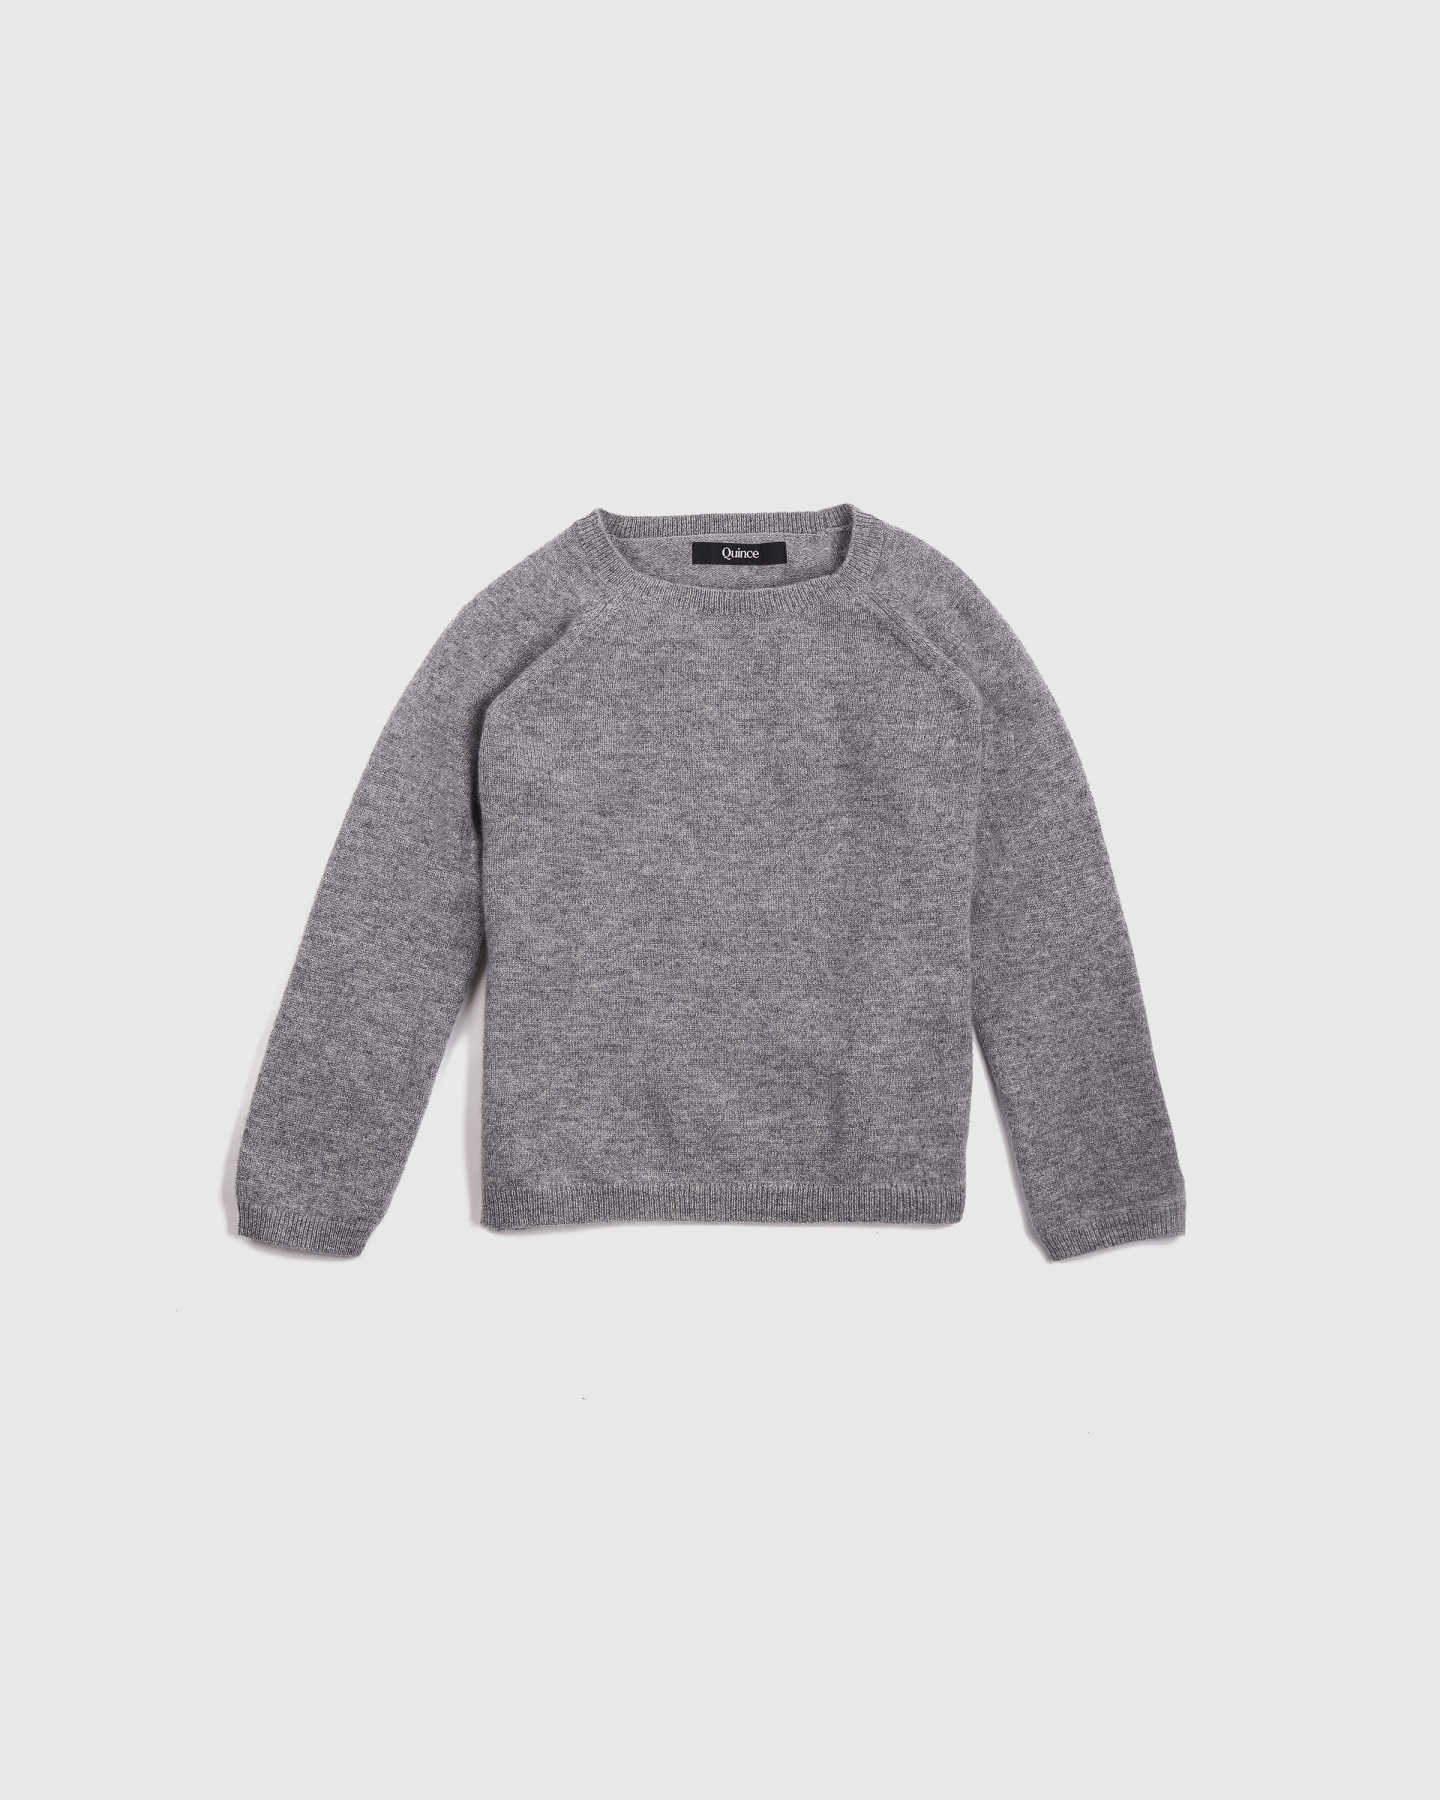 Mongolian Cashmere Toddler Pullover - Heather Grey - 0 - Thumbnail